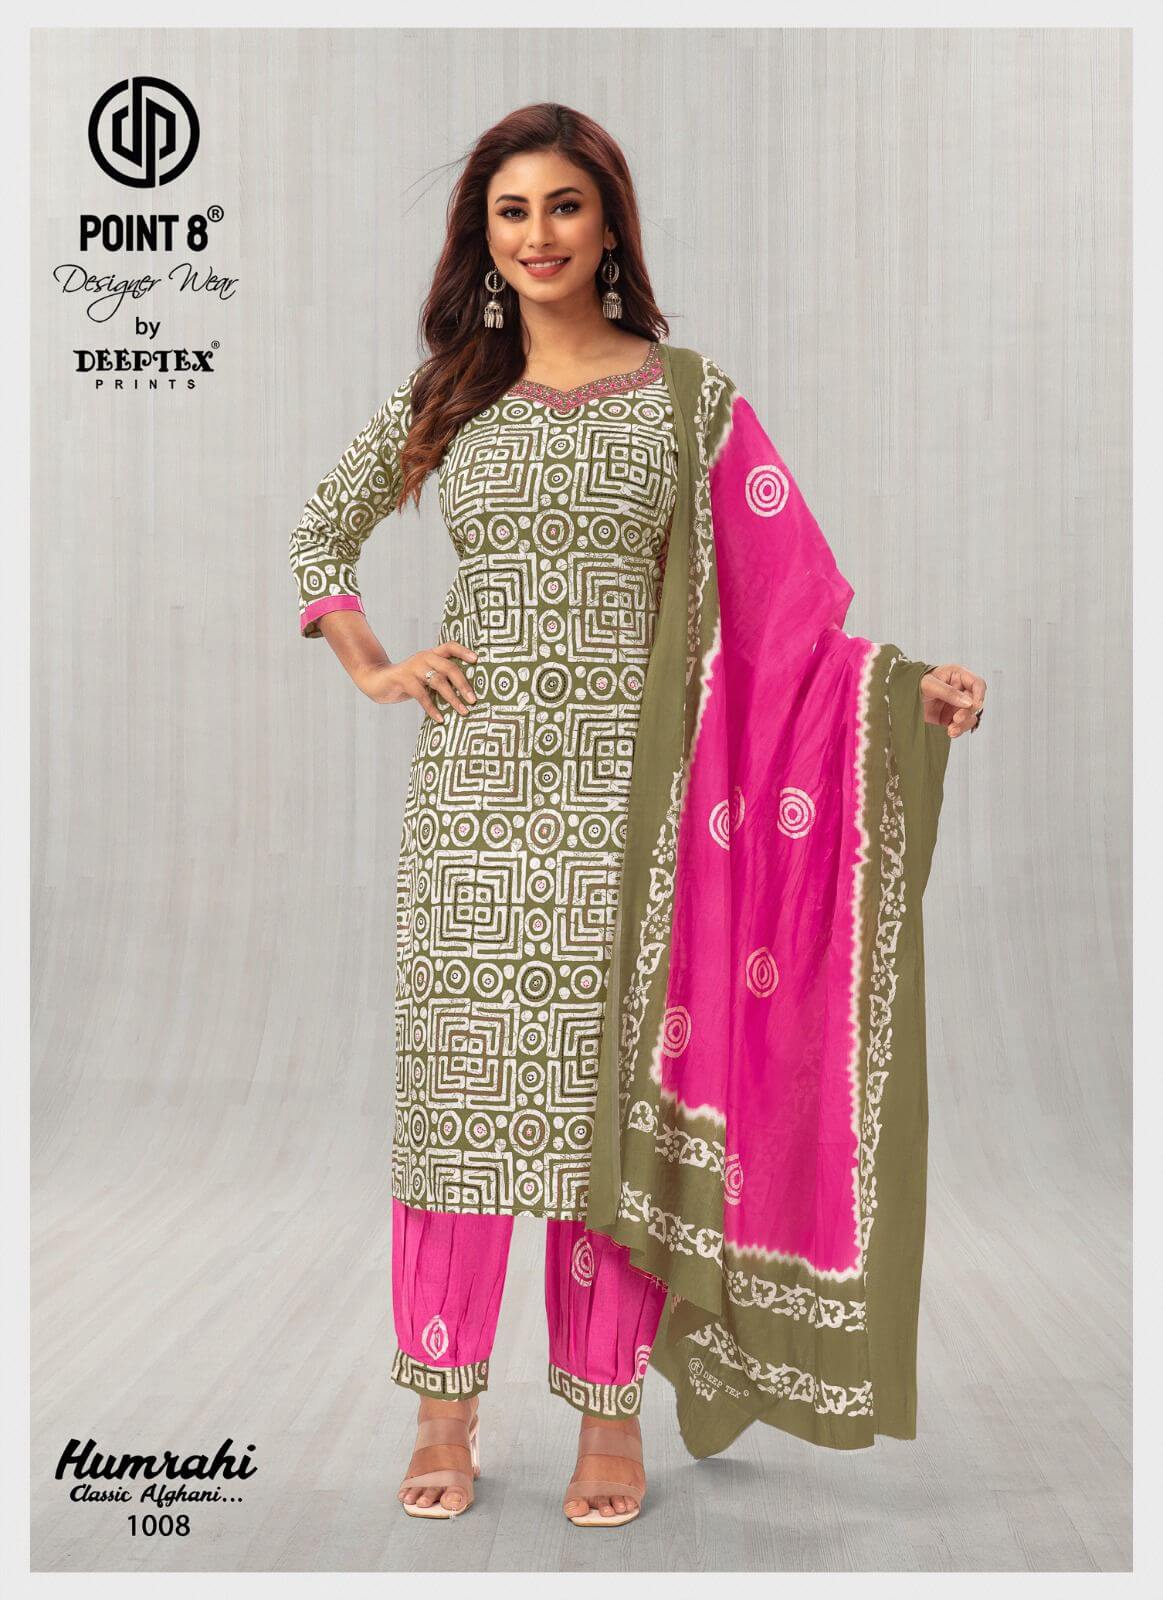 Deeptex Point 8 Humrahi vol 1 collection 7